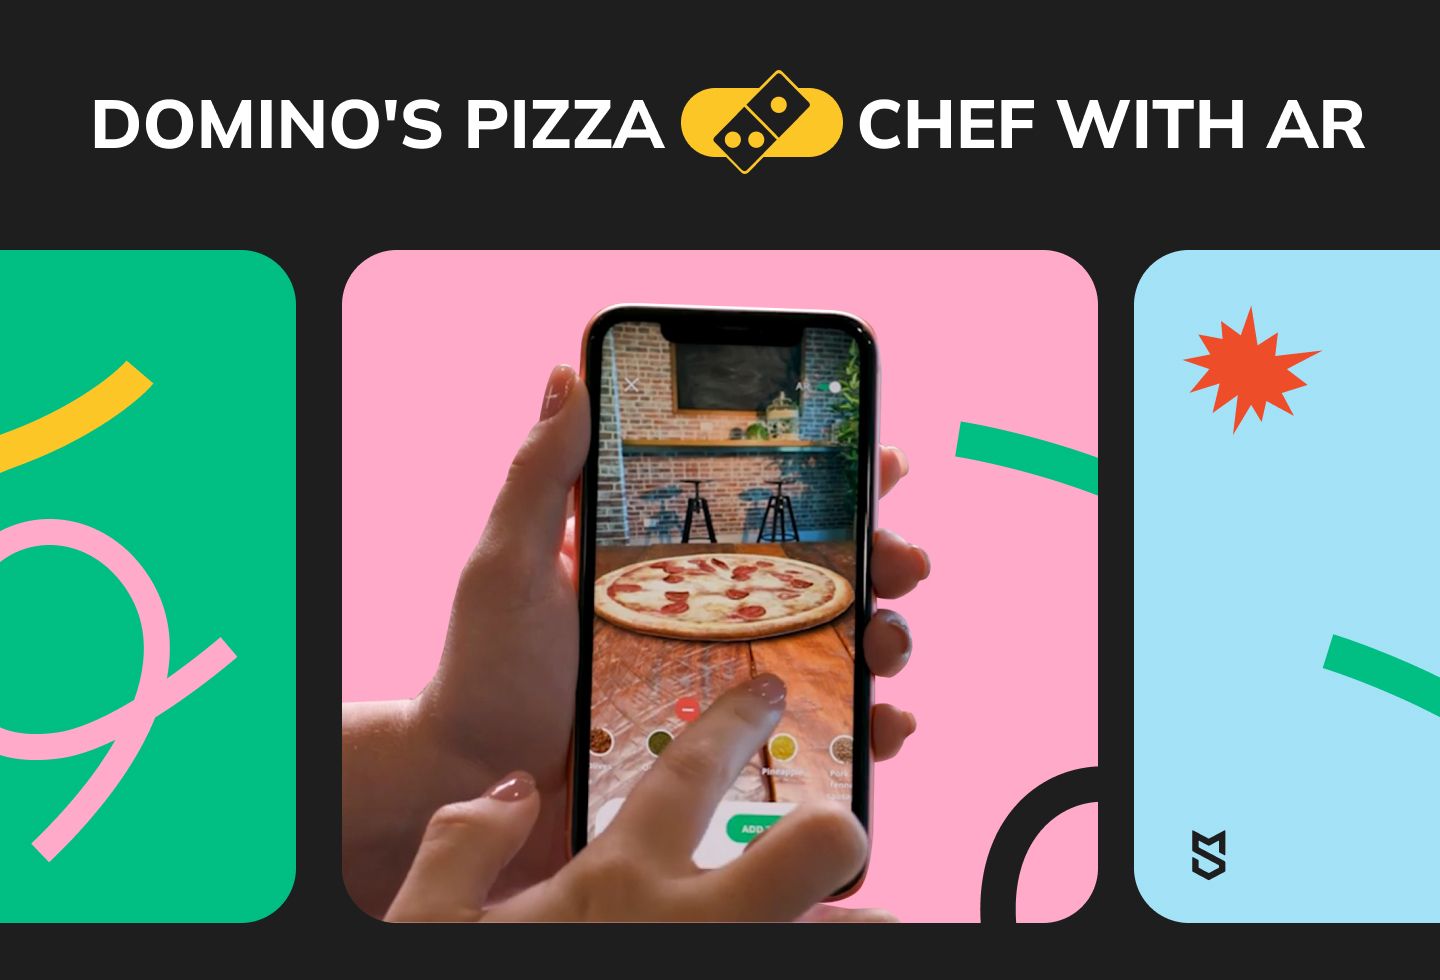 Domino's pizza chef with AR